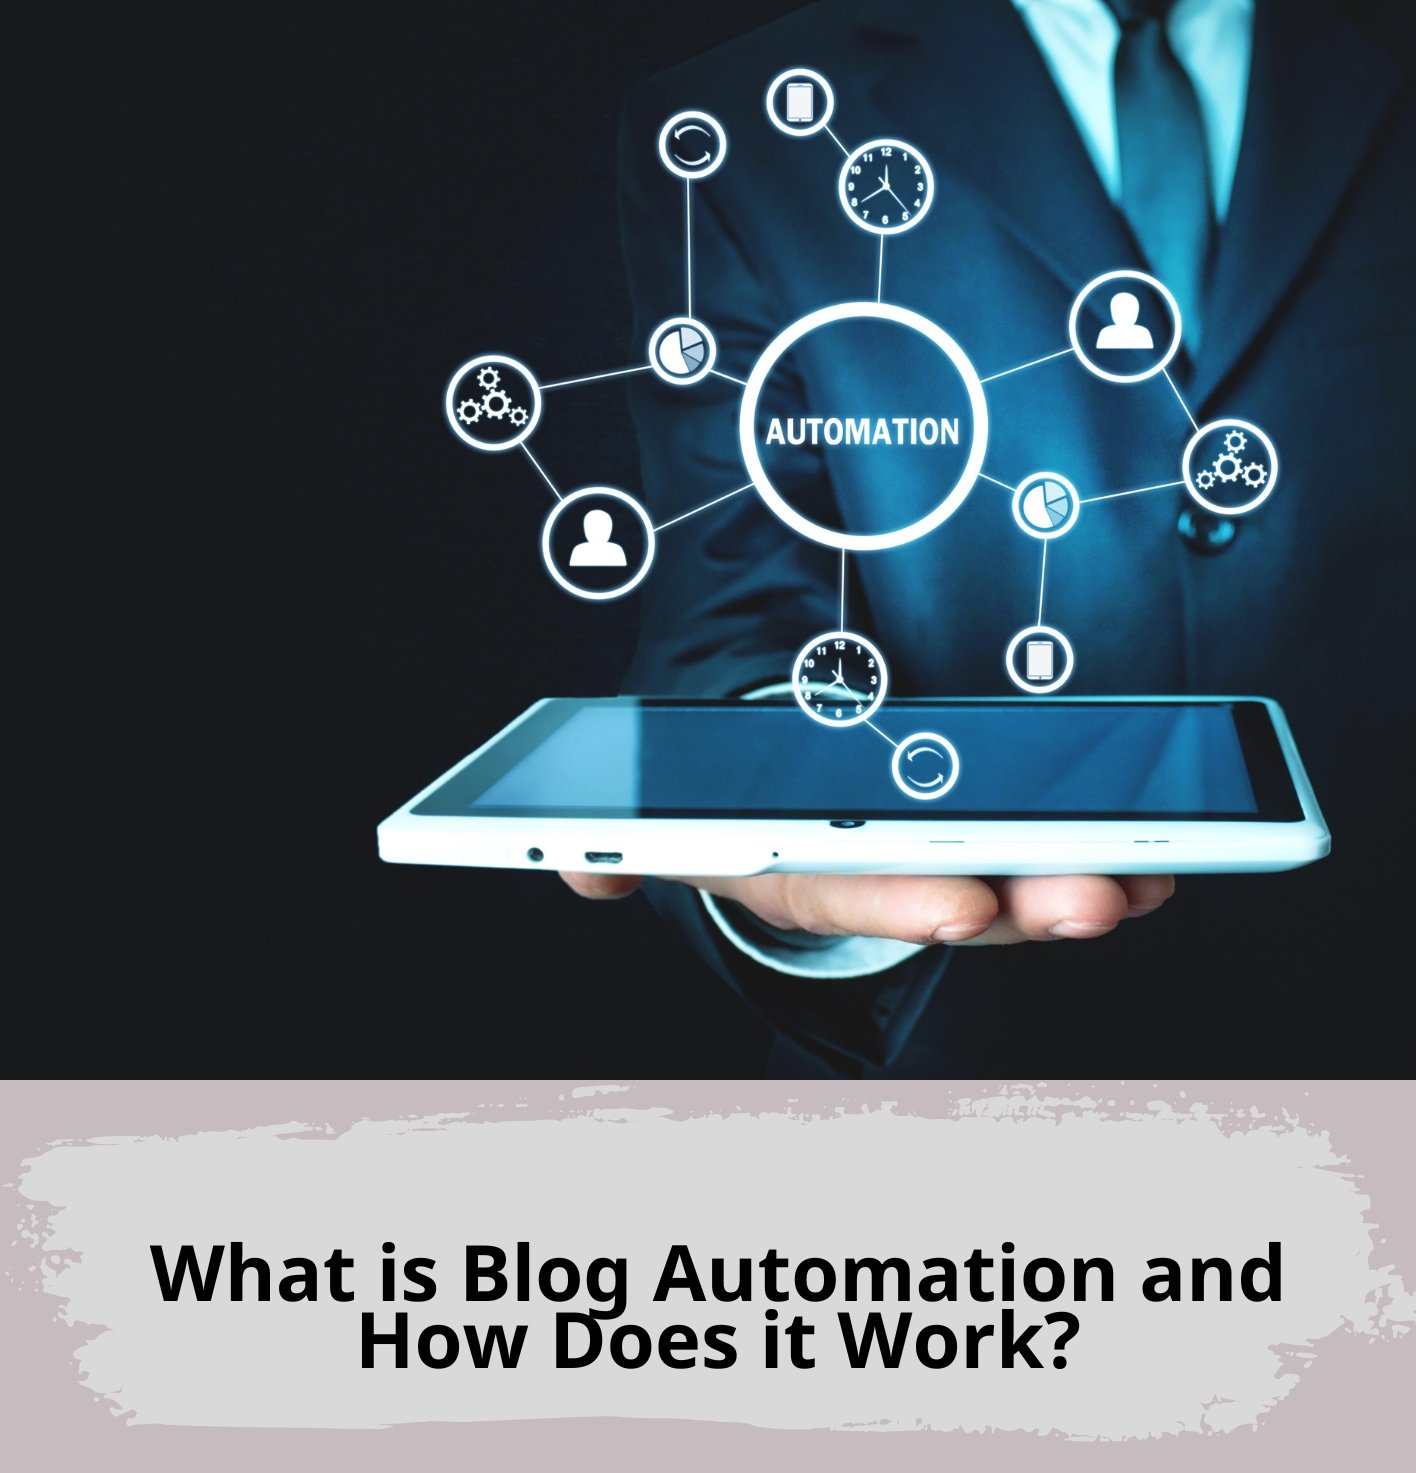 What is Blog Automation and How Does it Work?